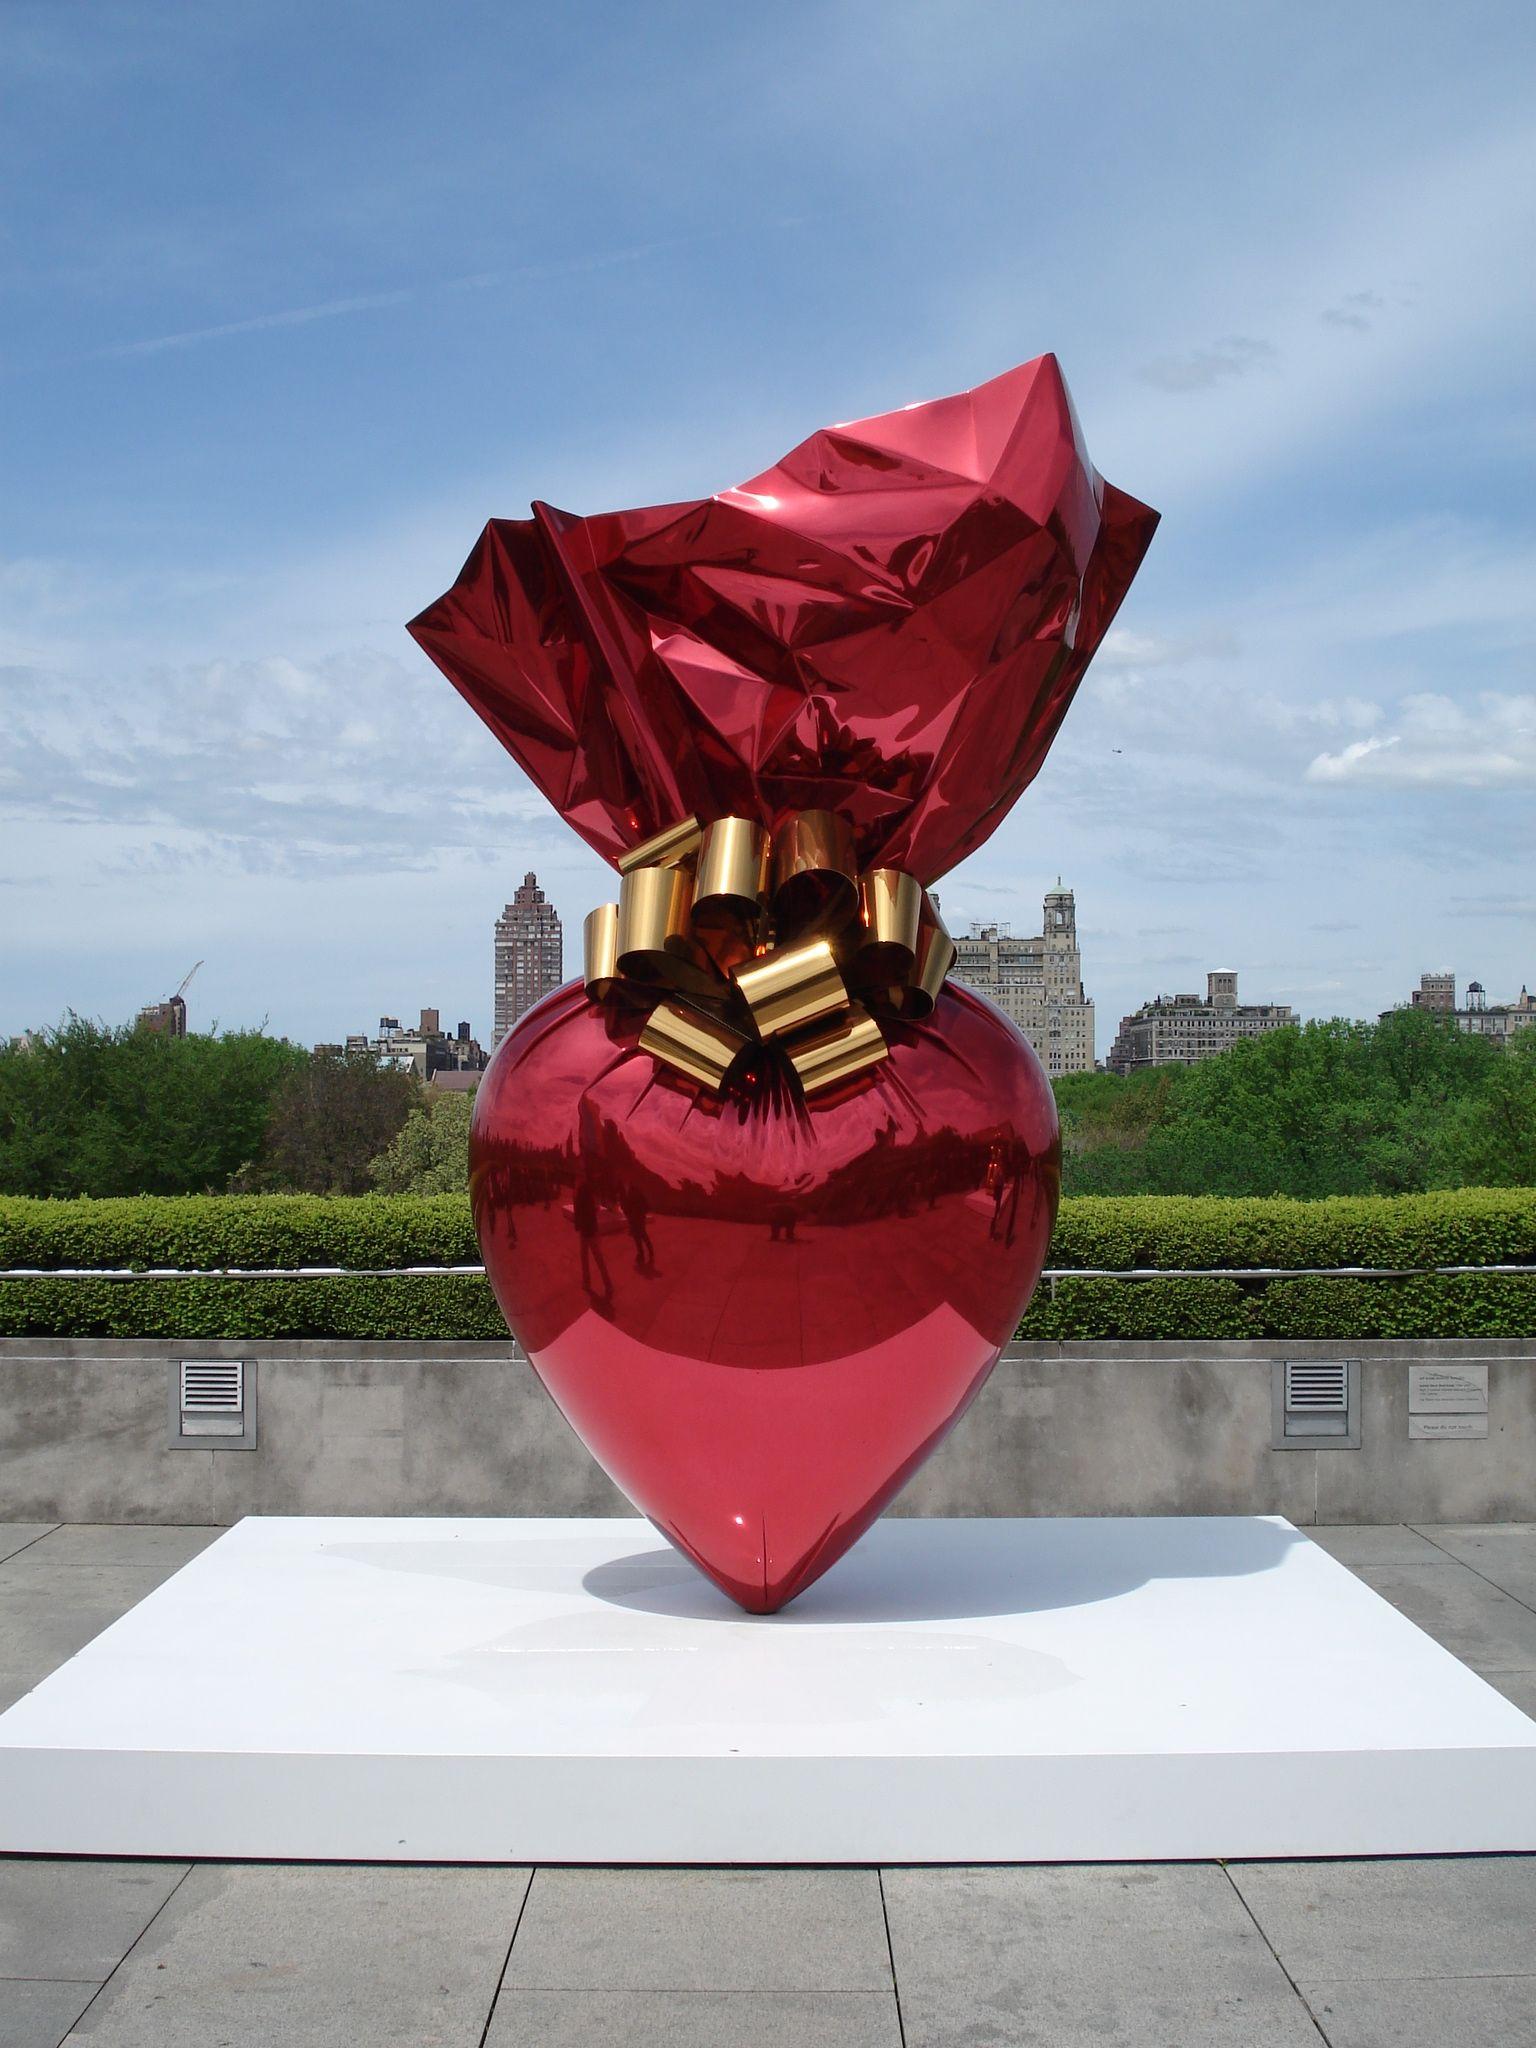 JEFF KOONS. m is for must